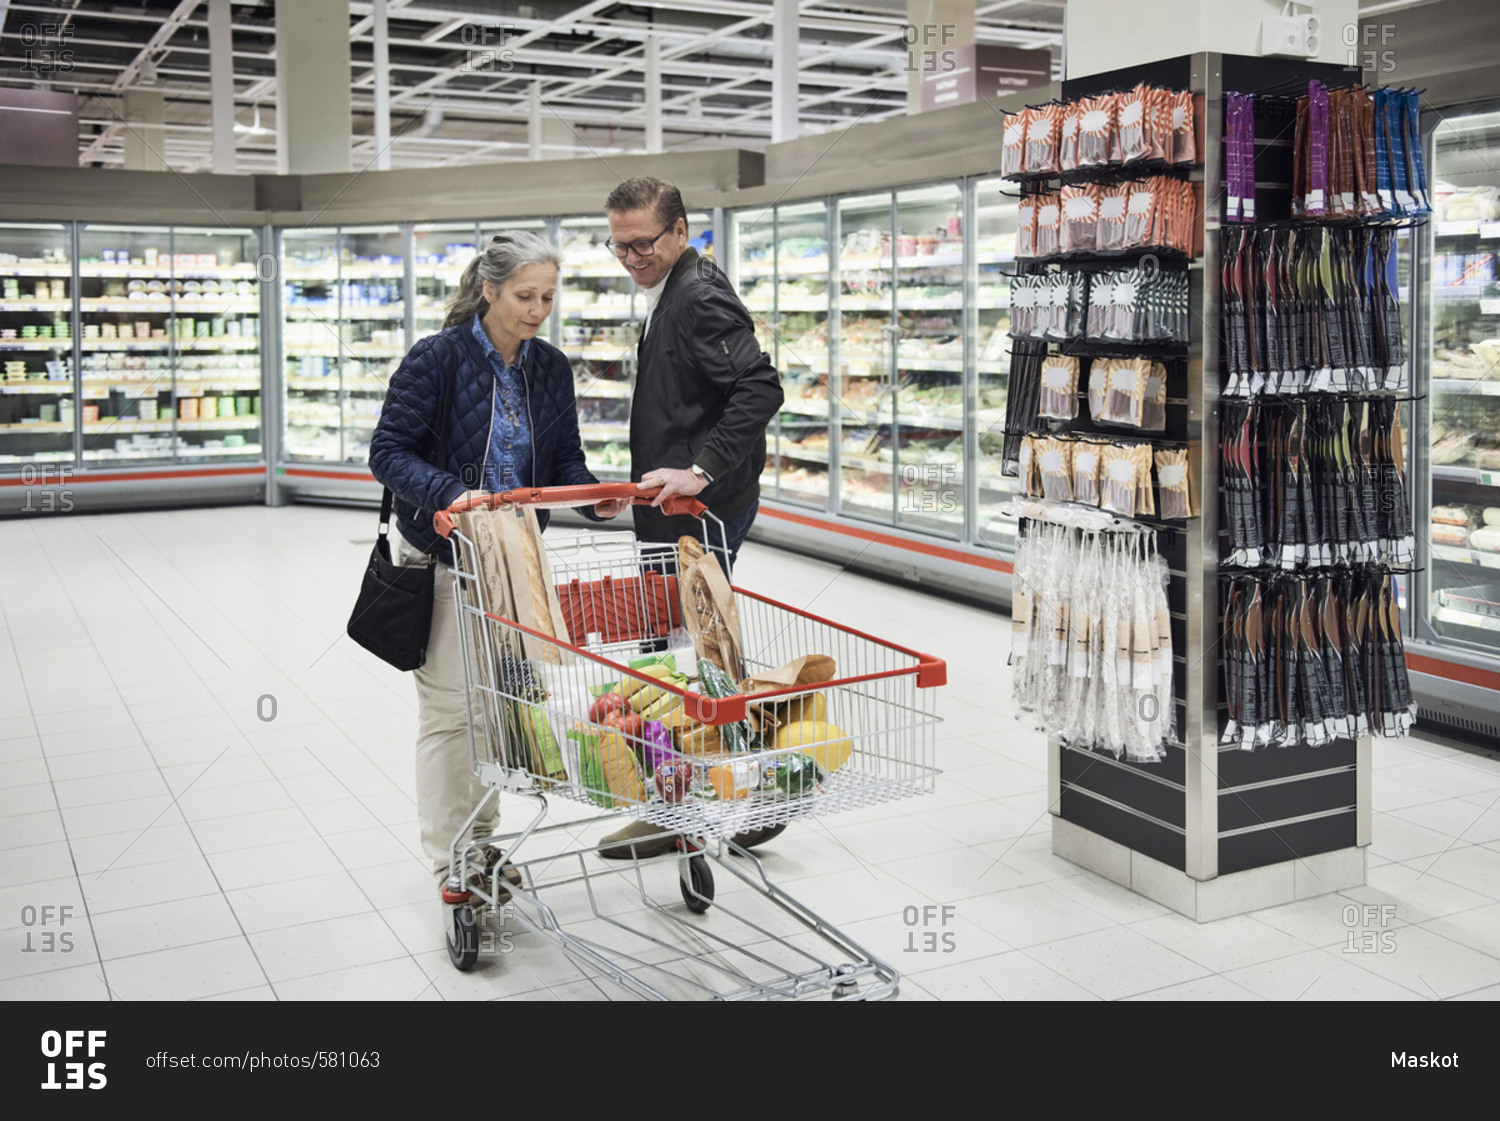 Mature couple with groceries in shopping cart at refrigerated section of supermarket